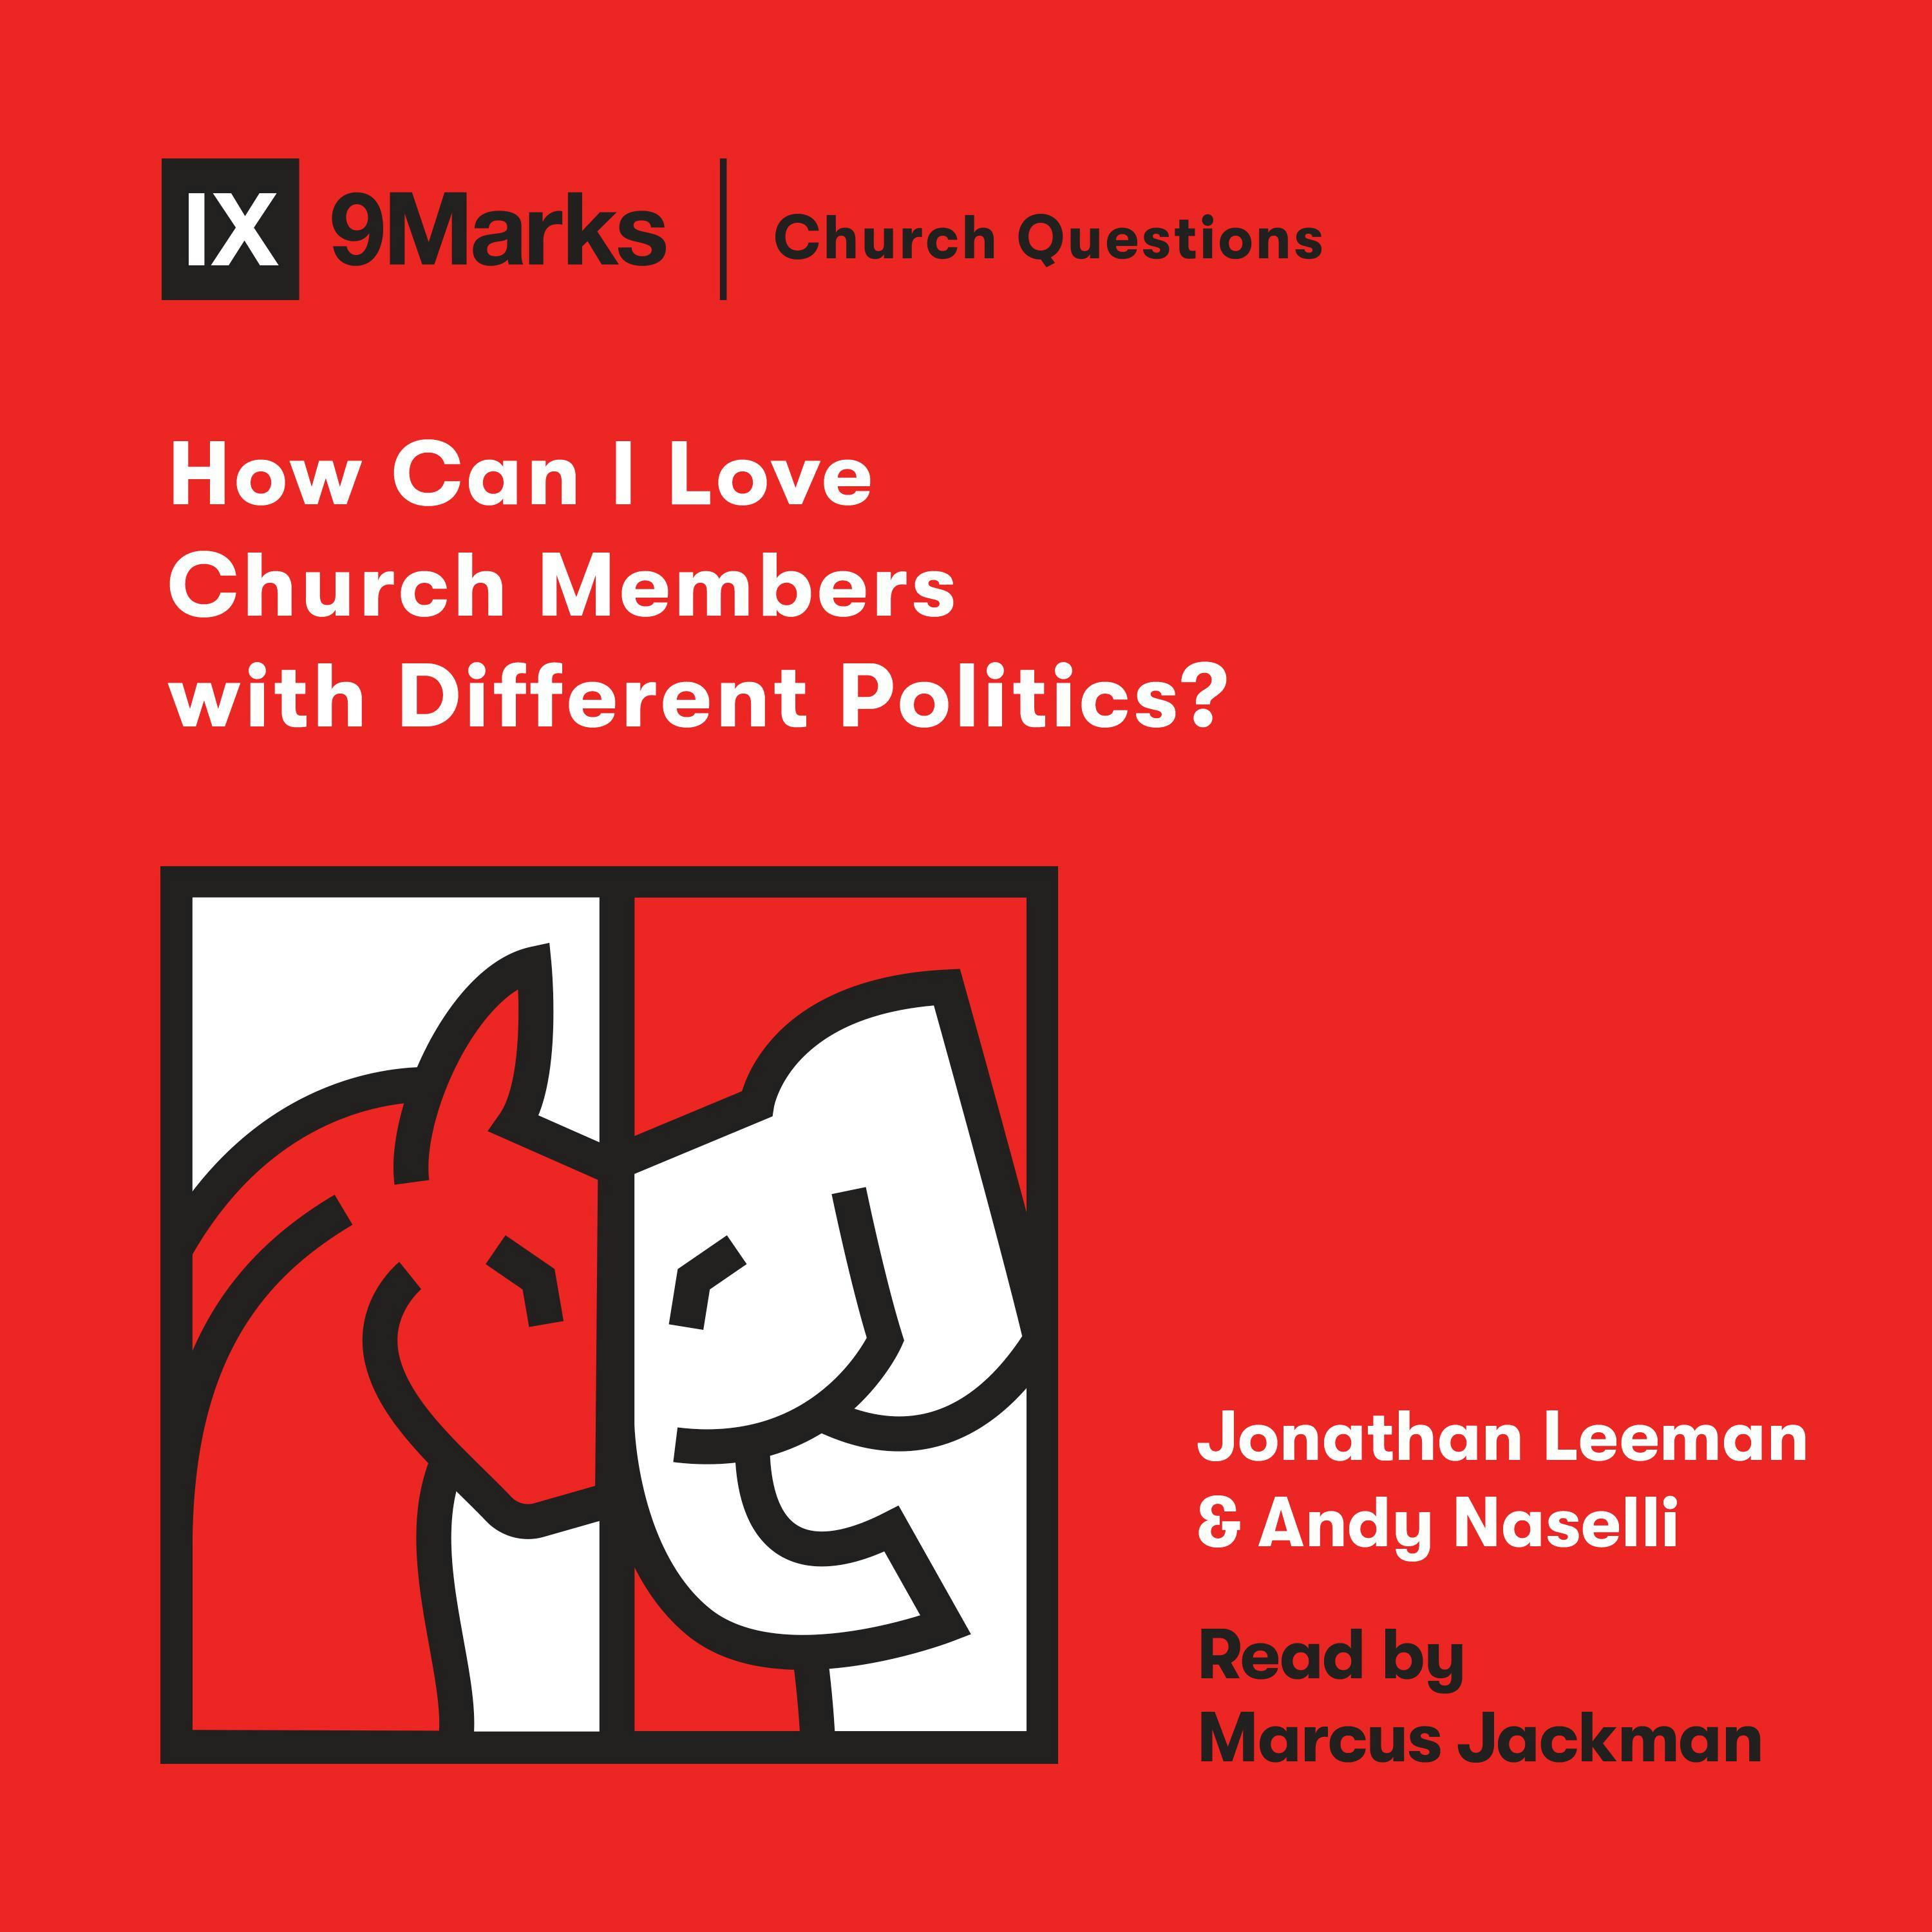 How Can I Love Church Members with Different Politics? - Jonathan Leeman, Andy Naselli